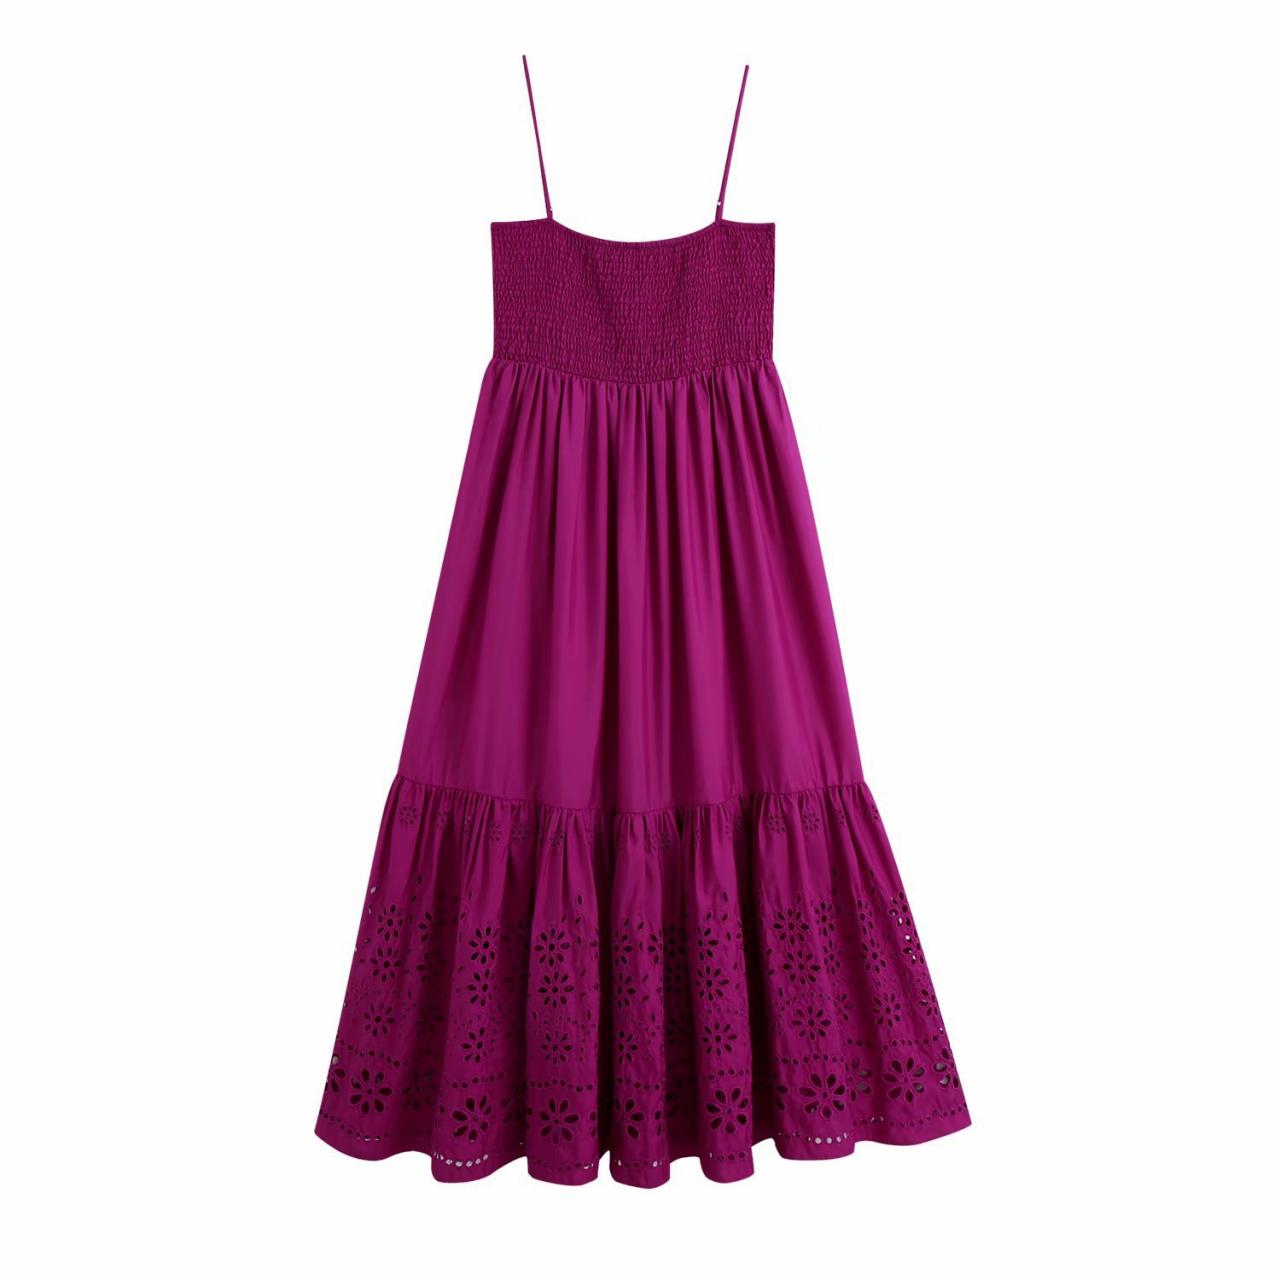 Long Hollow-out Embroidered Dress With Condole Belt